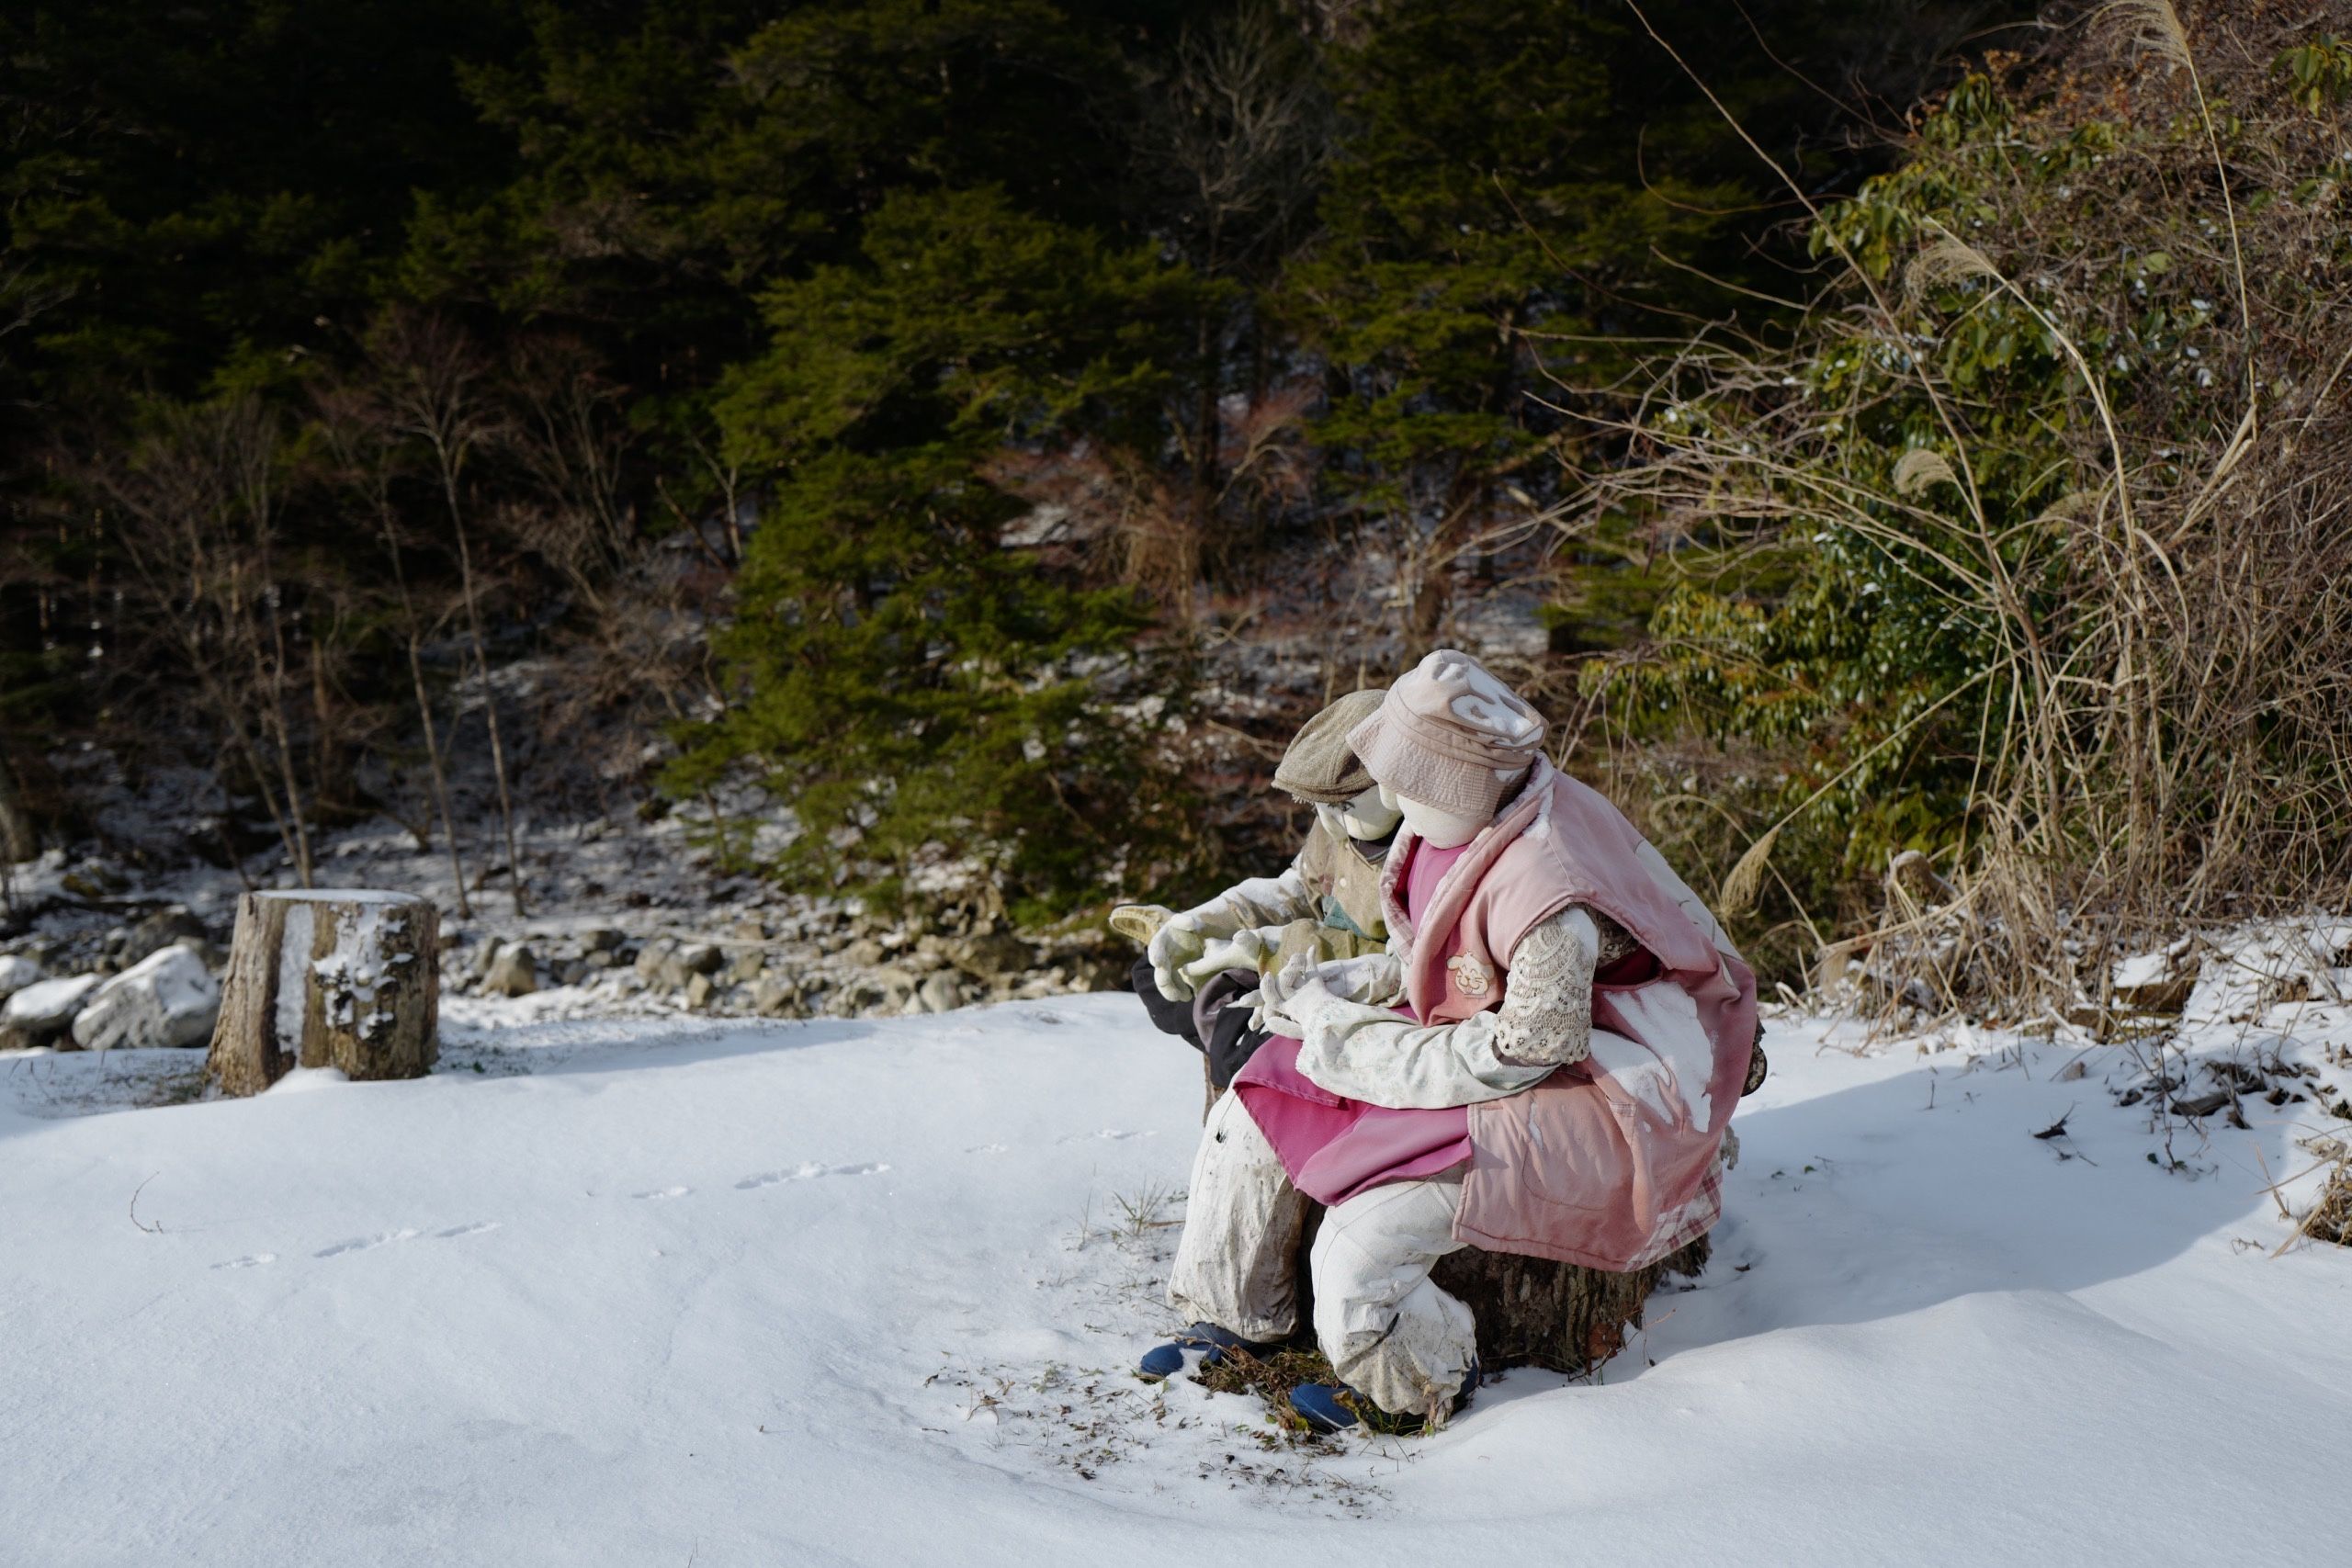 Another two dolls sit outside on a bench in the snow.